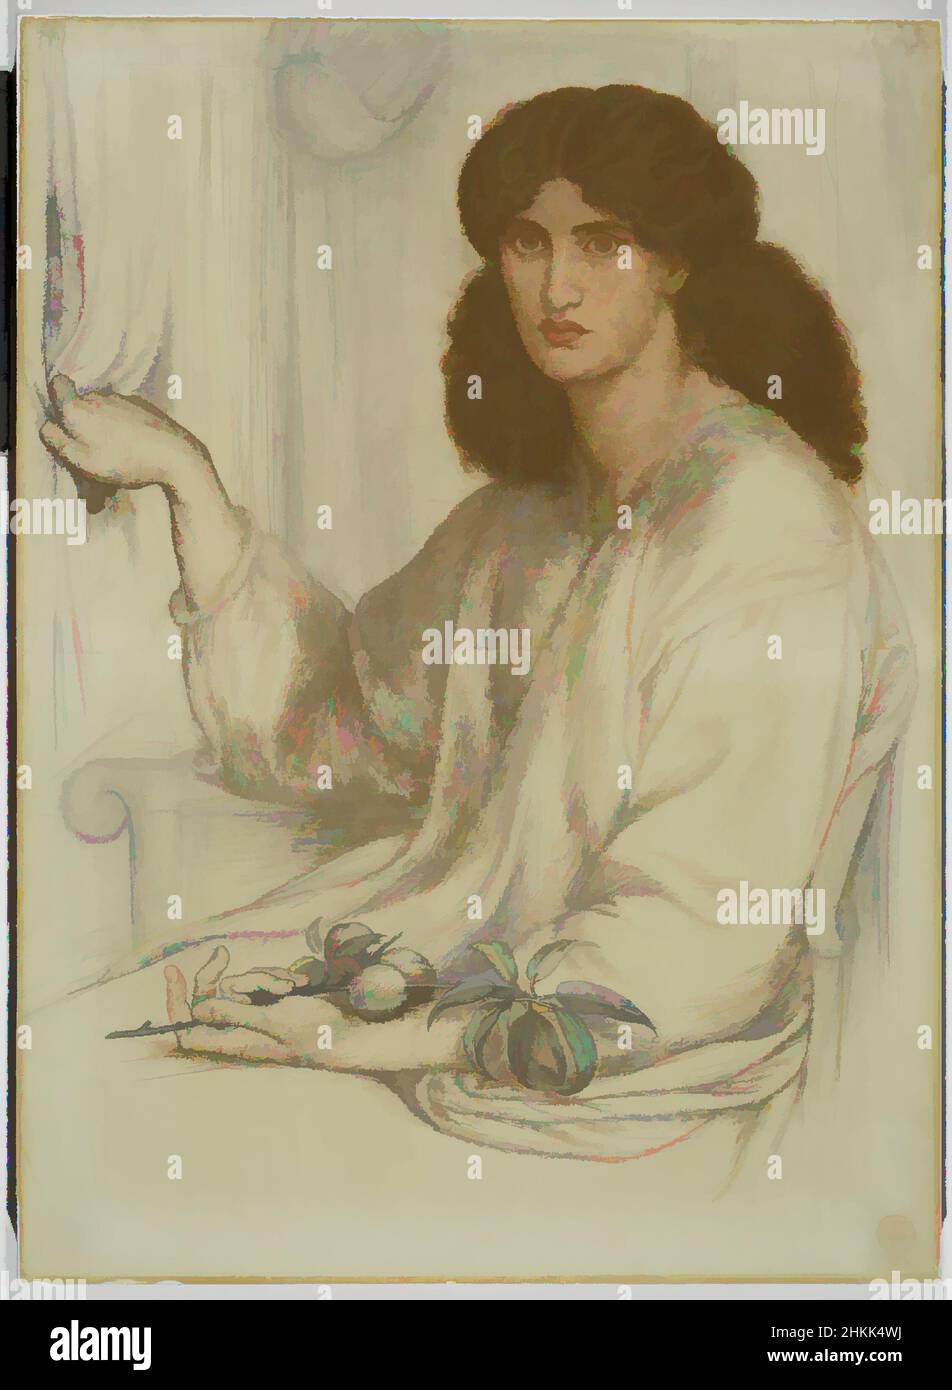 Art inspired by Silence, Dante Gabriel Rossetti, British, 1828-1882, Dry pigment, pastel or chalk on two sheets of joined wove paper, England, 1870, 41 7/8 x 30 3/8 in., 106.4 x 77.2 cm, drapes, Flower, hair, pensive, portraits, pre-Raphaelite, waves, woman, Classic works modernized by Artotop with a splash of modernity. Shapes, color and value, eye-catching visual impact on art. Emotions through freedom of artworks in a contemporary way. A timeless message pursuing a wildly creative new direction. Artists turning to the digital medium and creating the Artotop NFT Stock Photo